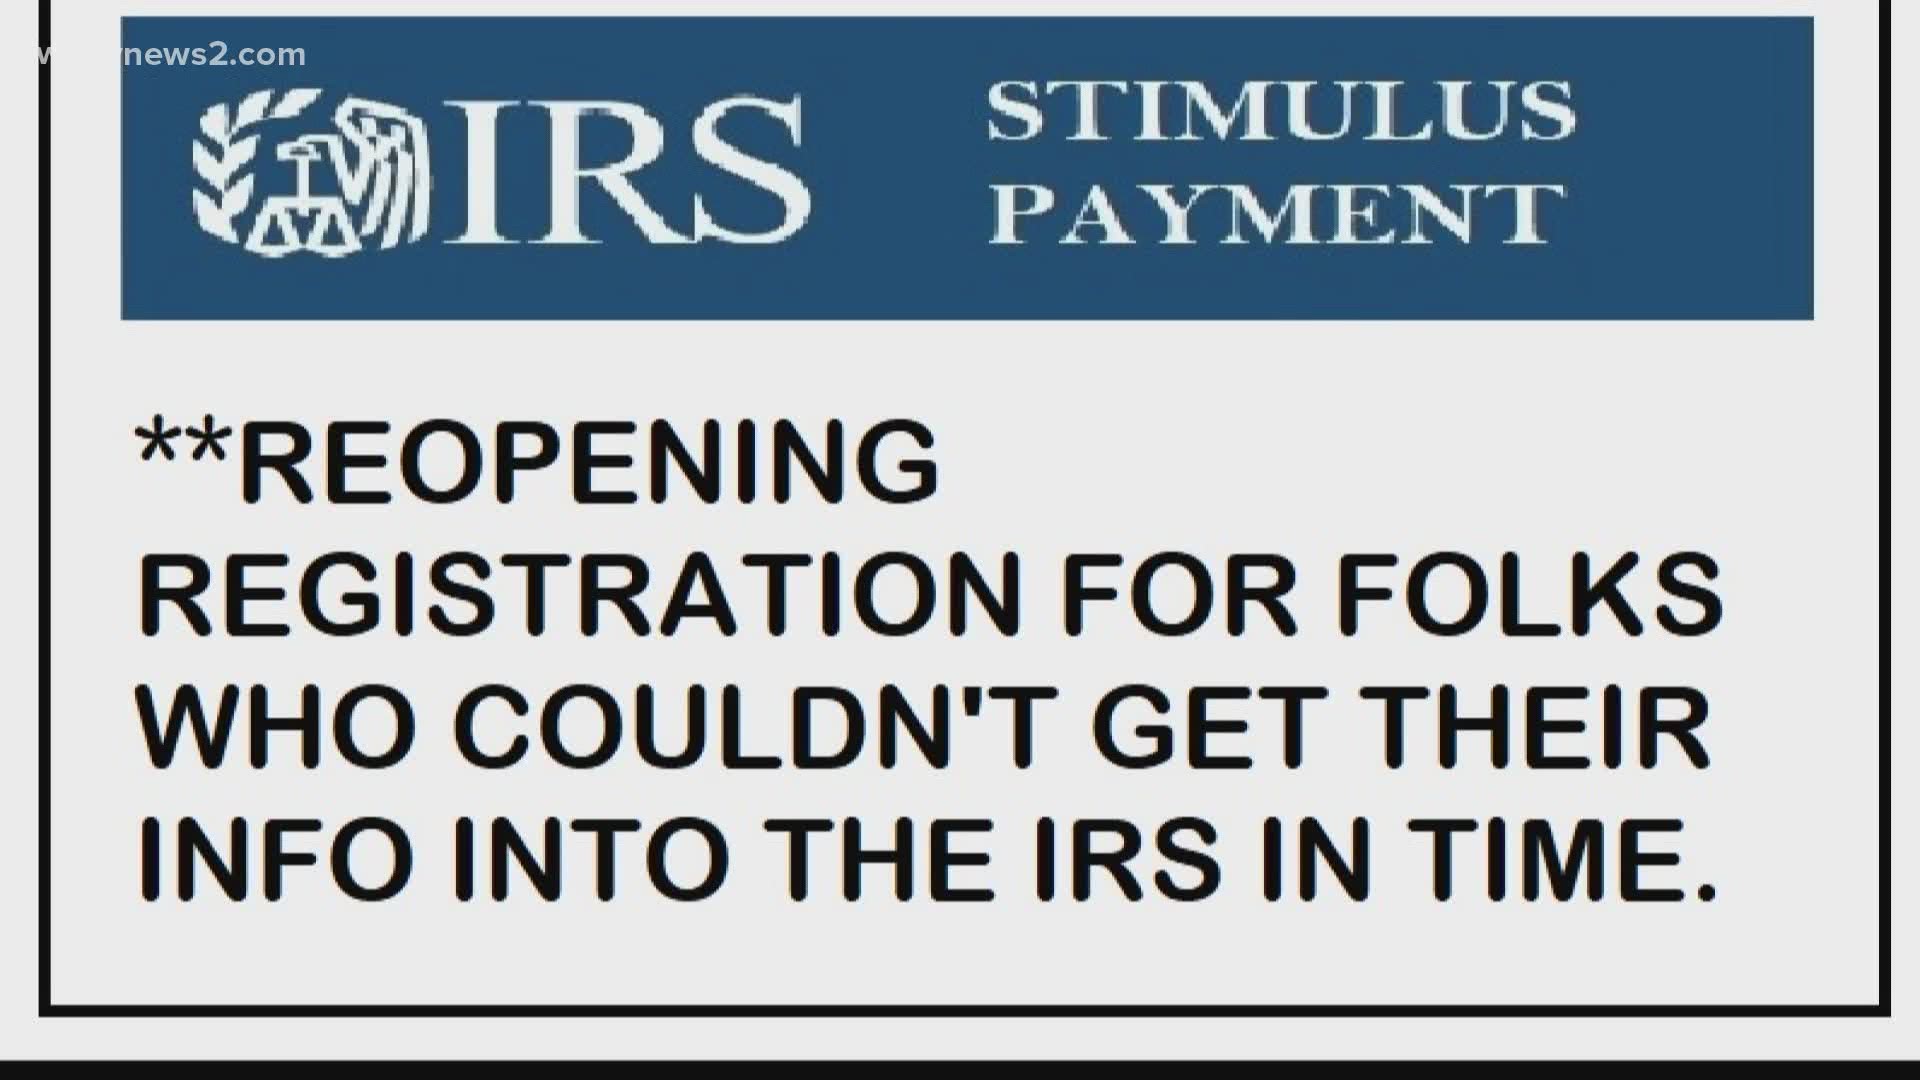 The IRS is reopening registration for folks who couldn't get their information into the IRS in time.